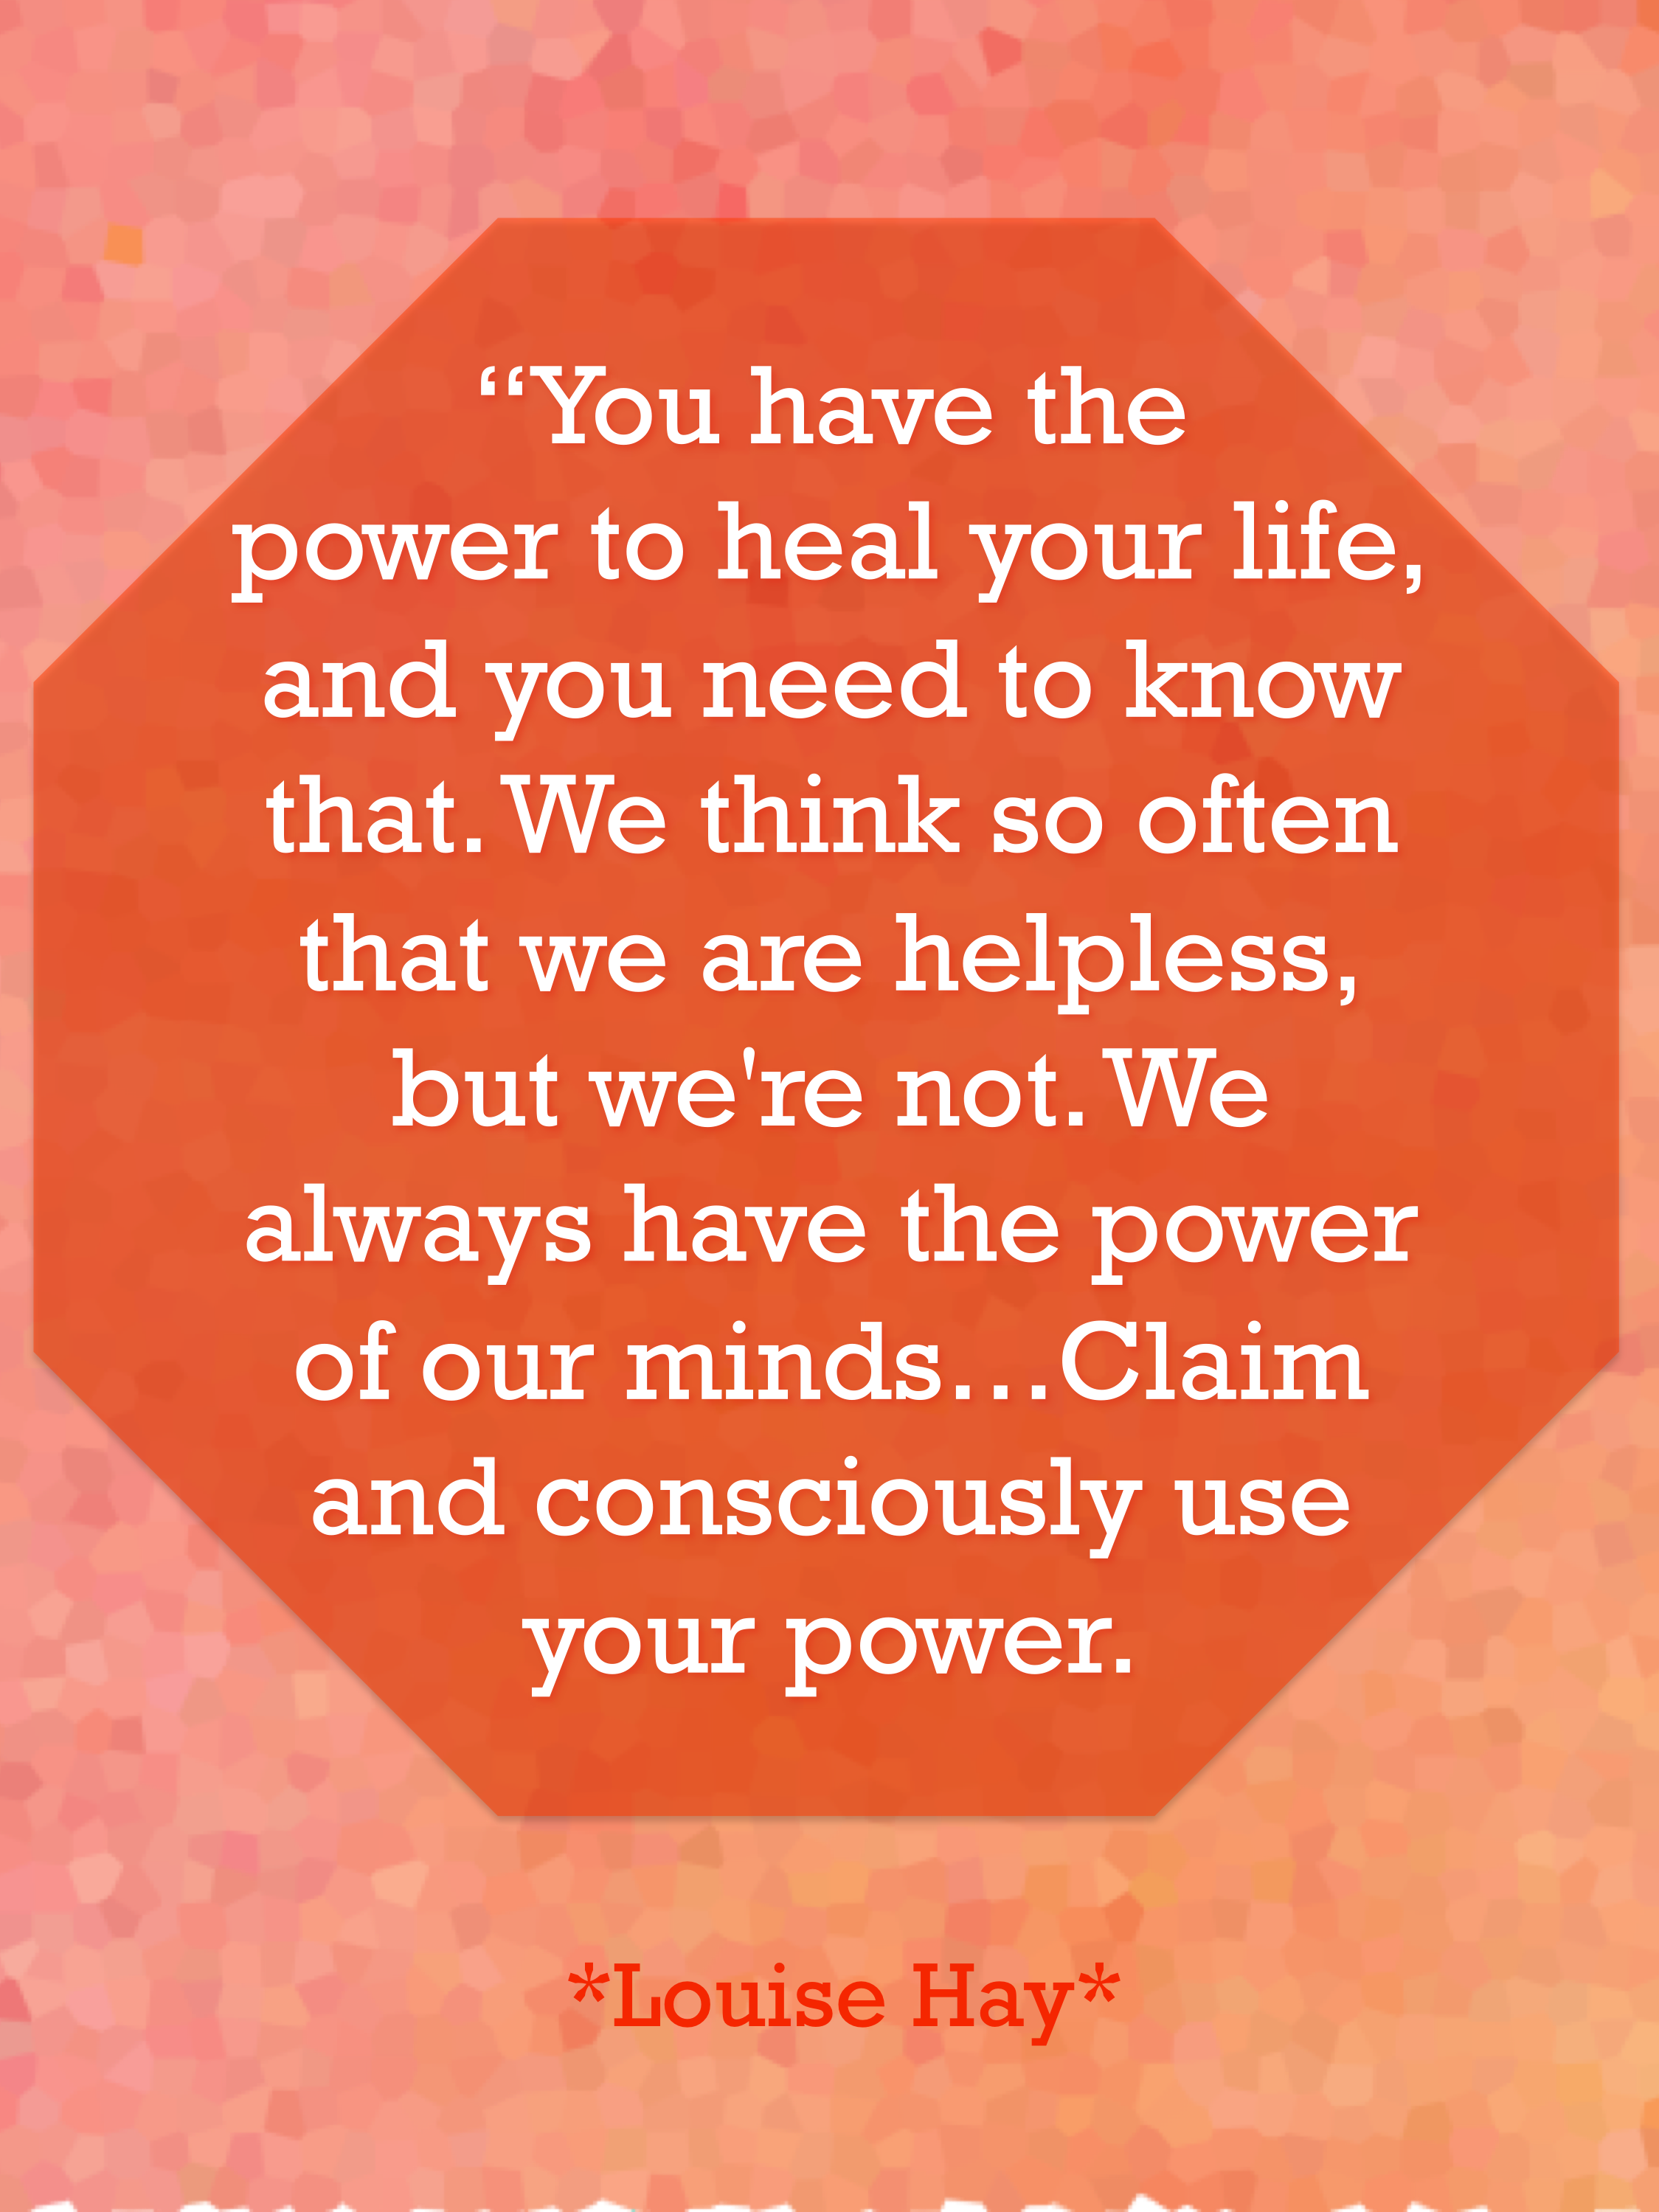 You have the power to heal your life, and you need to know that. We think so often that we are helpless, but we're not. We always have the power of our minds... Louise Hay